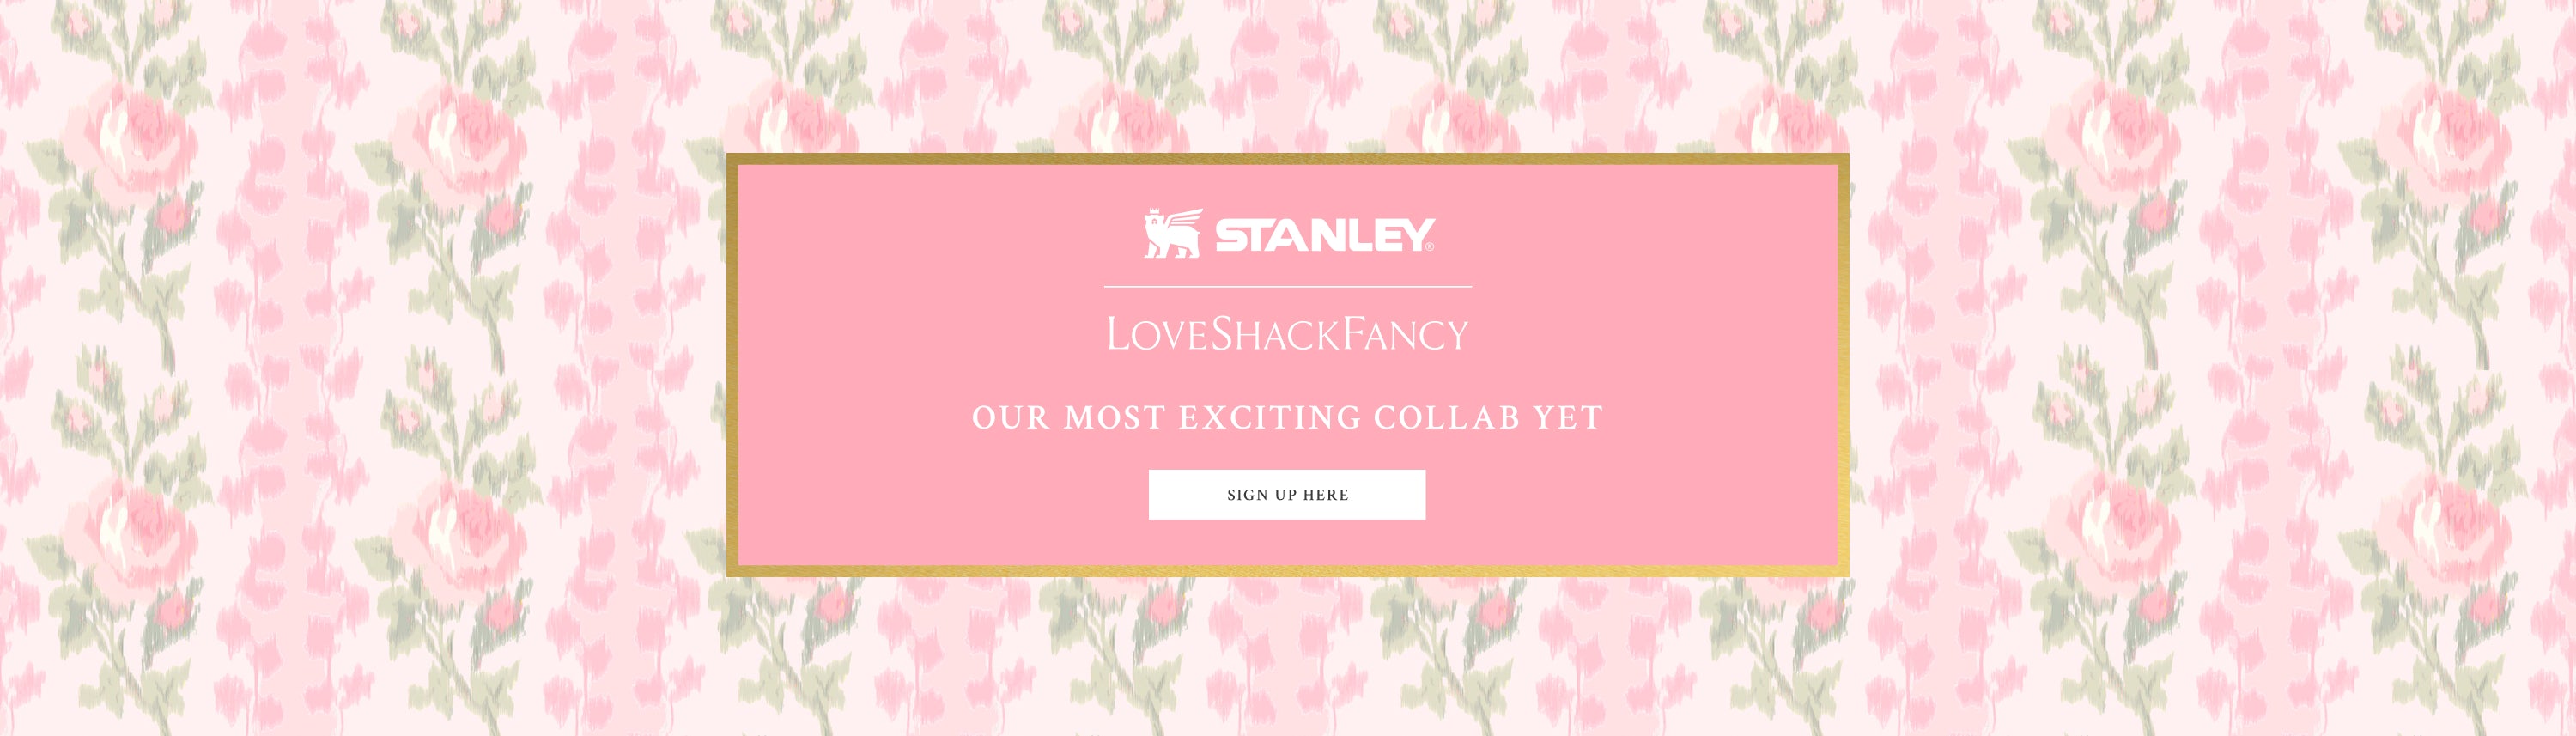 Stanley x LoveShackFancy: Our most exciting collab yet. Sign up here.